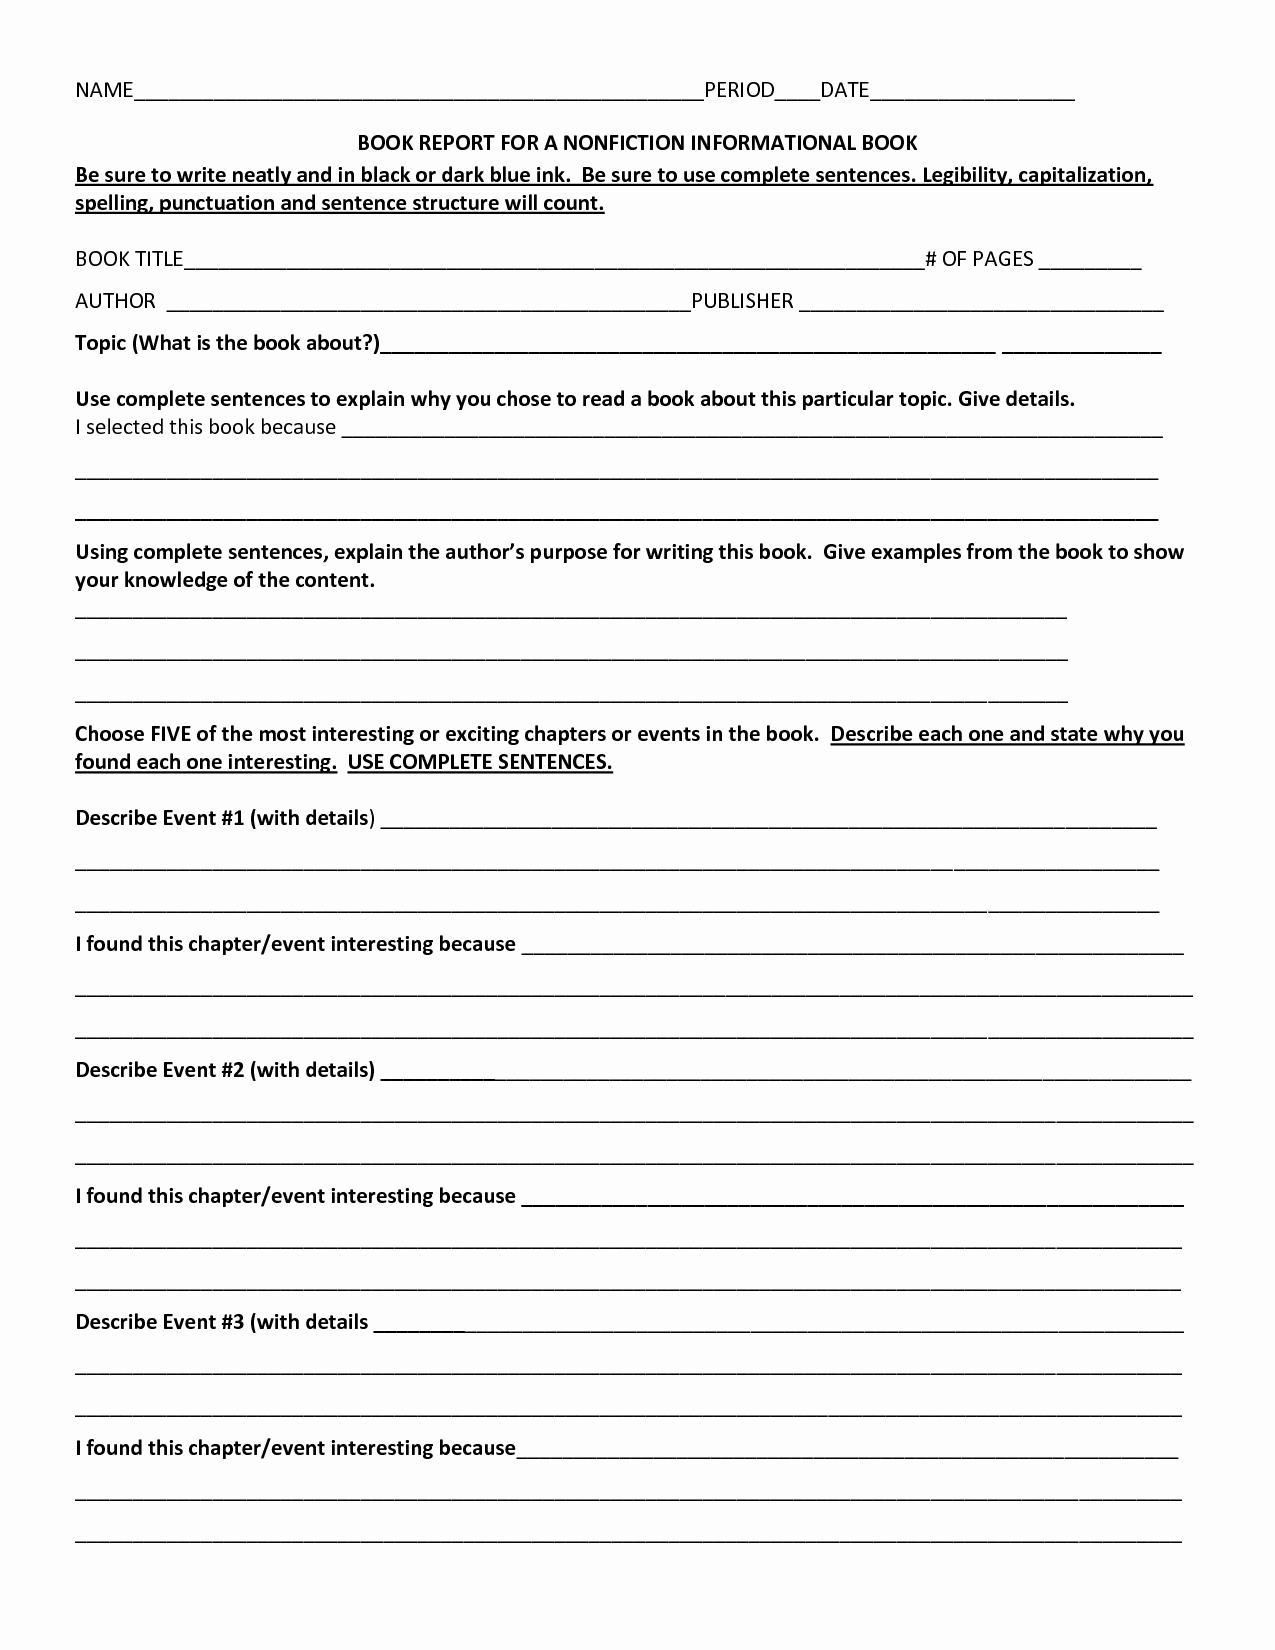 Fiction Book Report Template Inspirational Printable Book Report forms for 4th Grade 6 Best Images